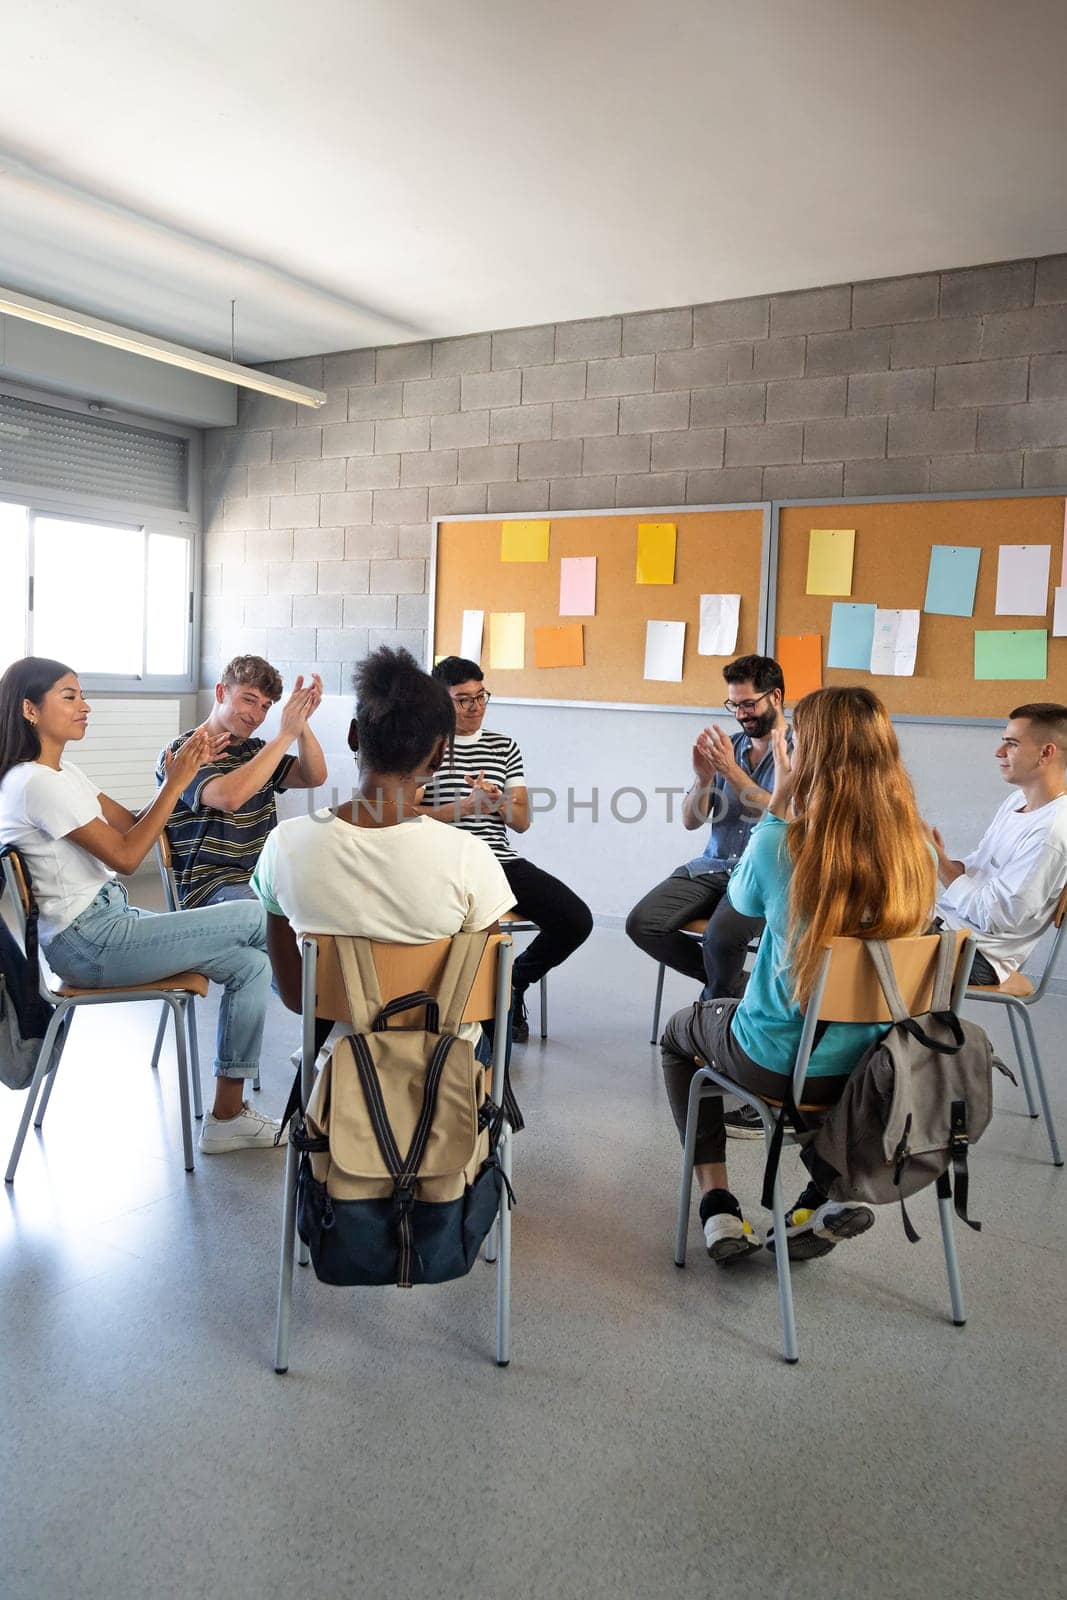 Multiracial group of high school students sitting in a circle clapping together celebrating achievement. Support group. Vertical image. Mental health concept.